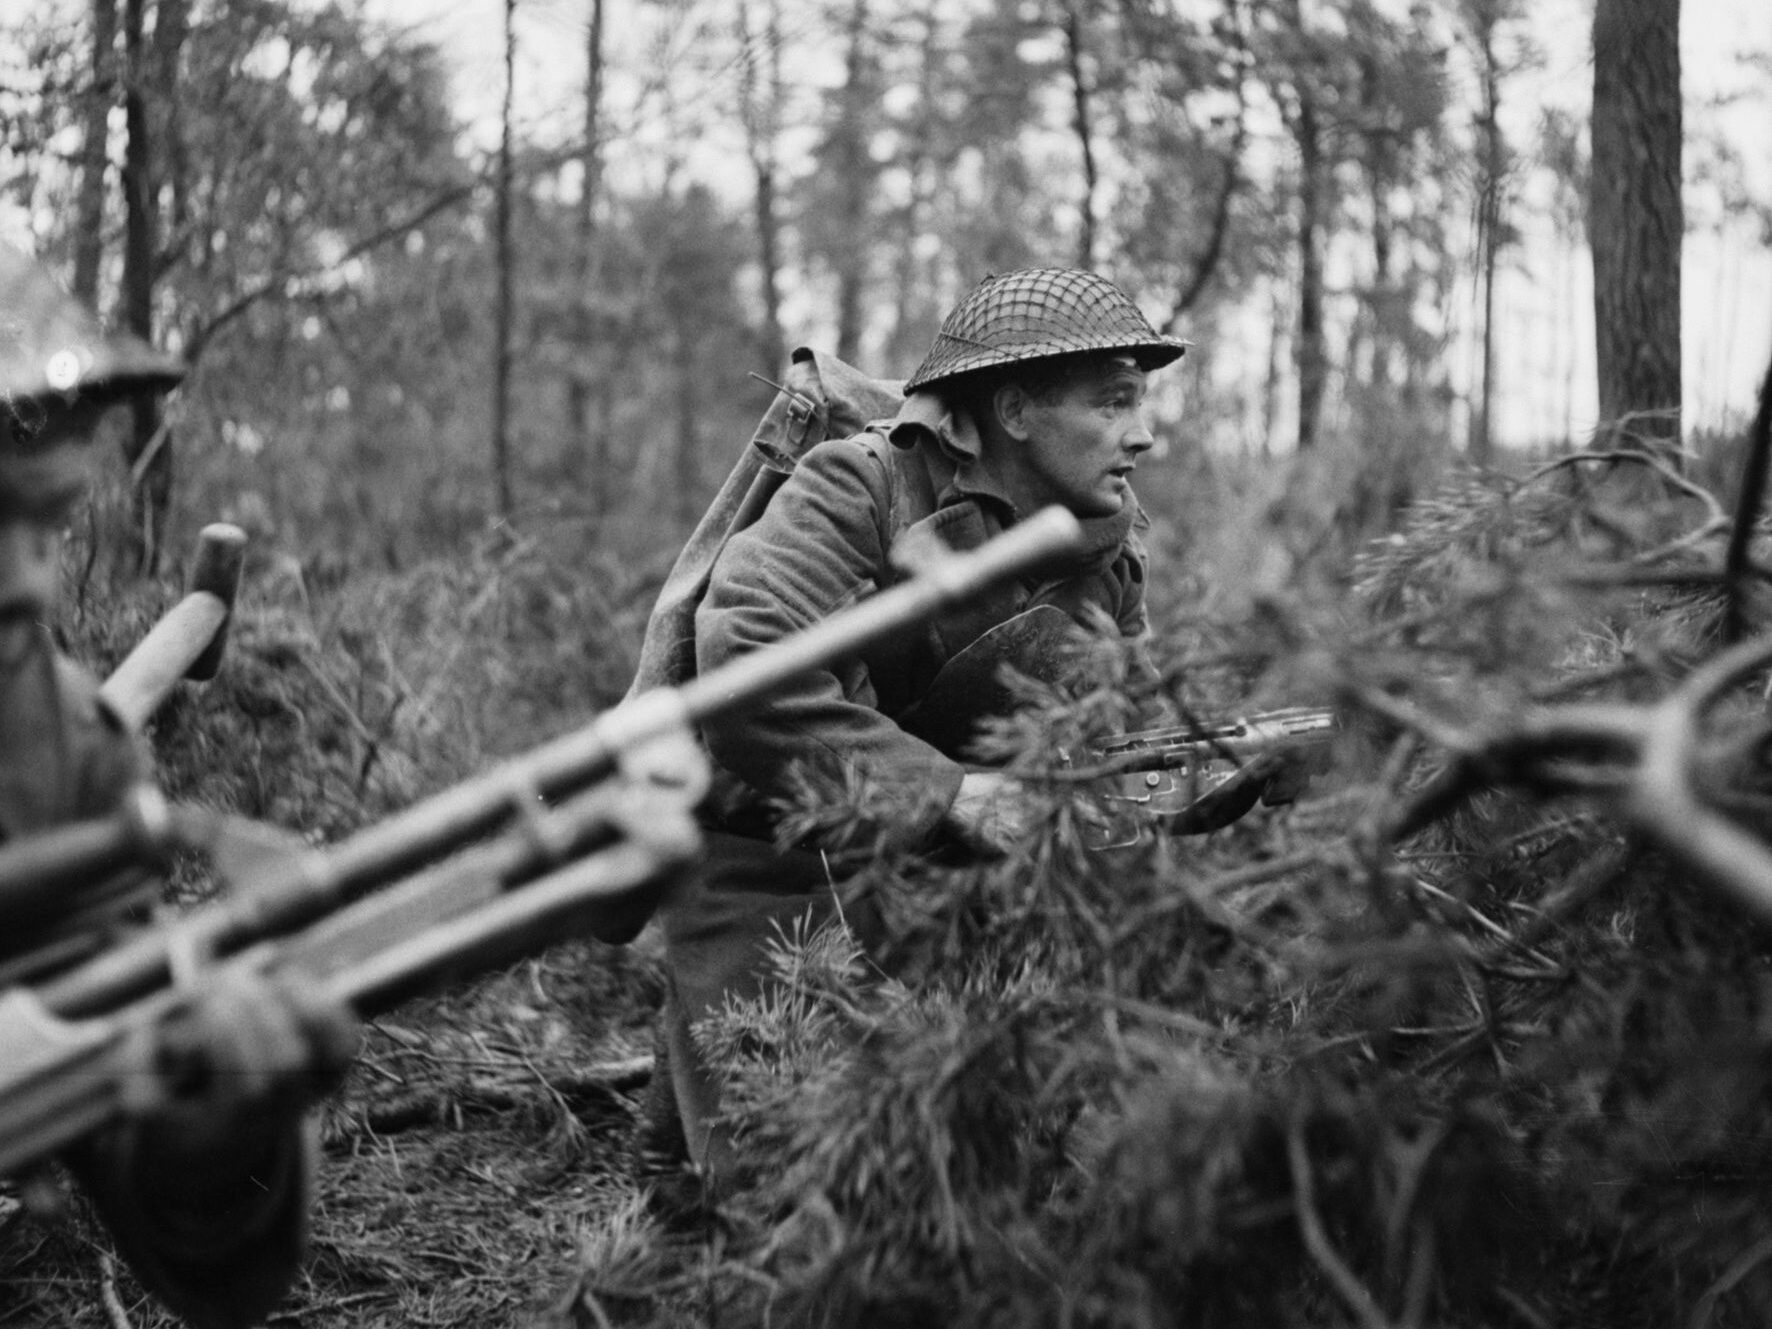 A soldier of the 5/7th Gordon Highlanders exhibits the stress of combat during operations in the Reichs- wald. This photograph was taken on February 9, 1945, the second day of Operation Veritable.